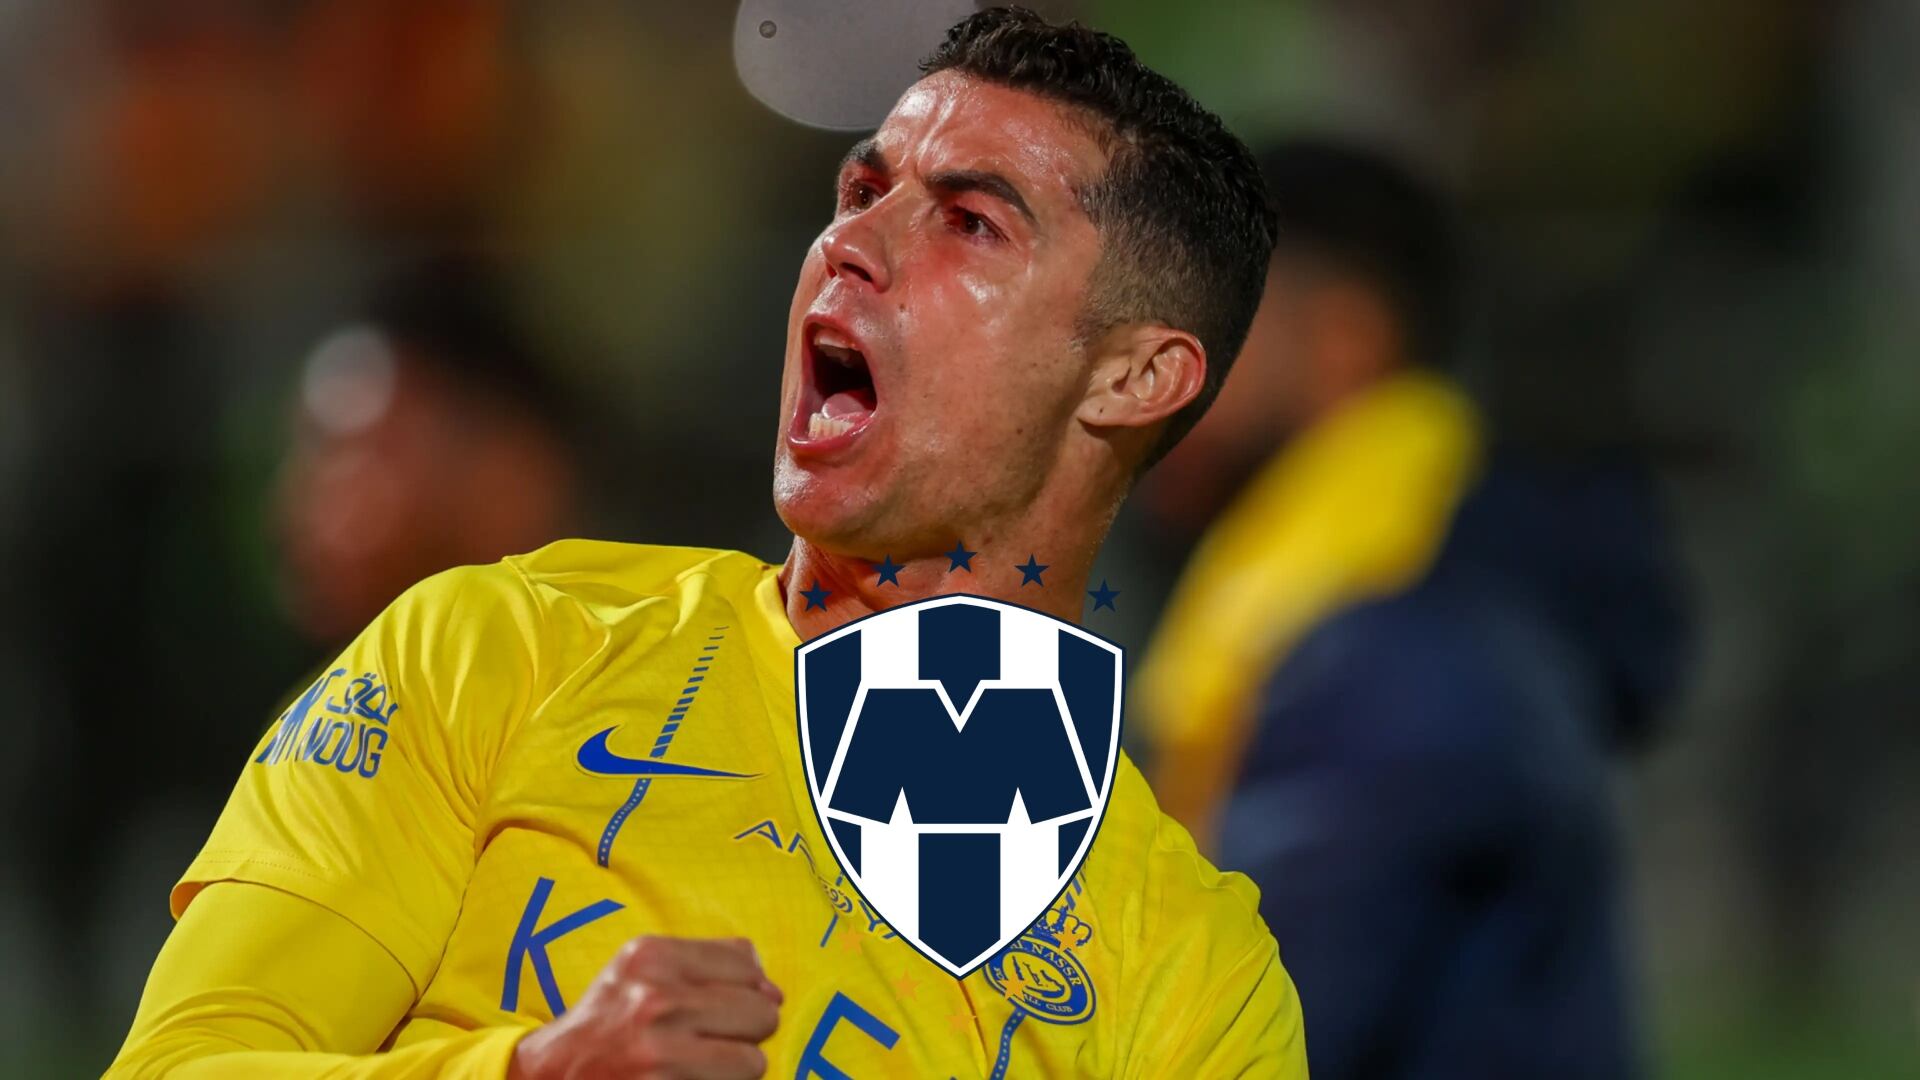 For Cristiano to play in Rayados, the company that could help CR7's arrival to Mexico